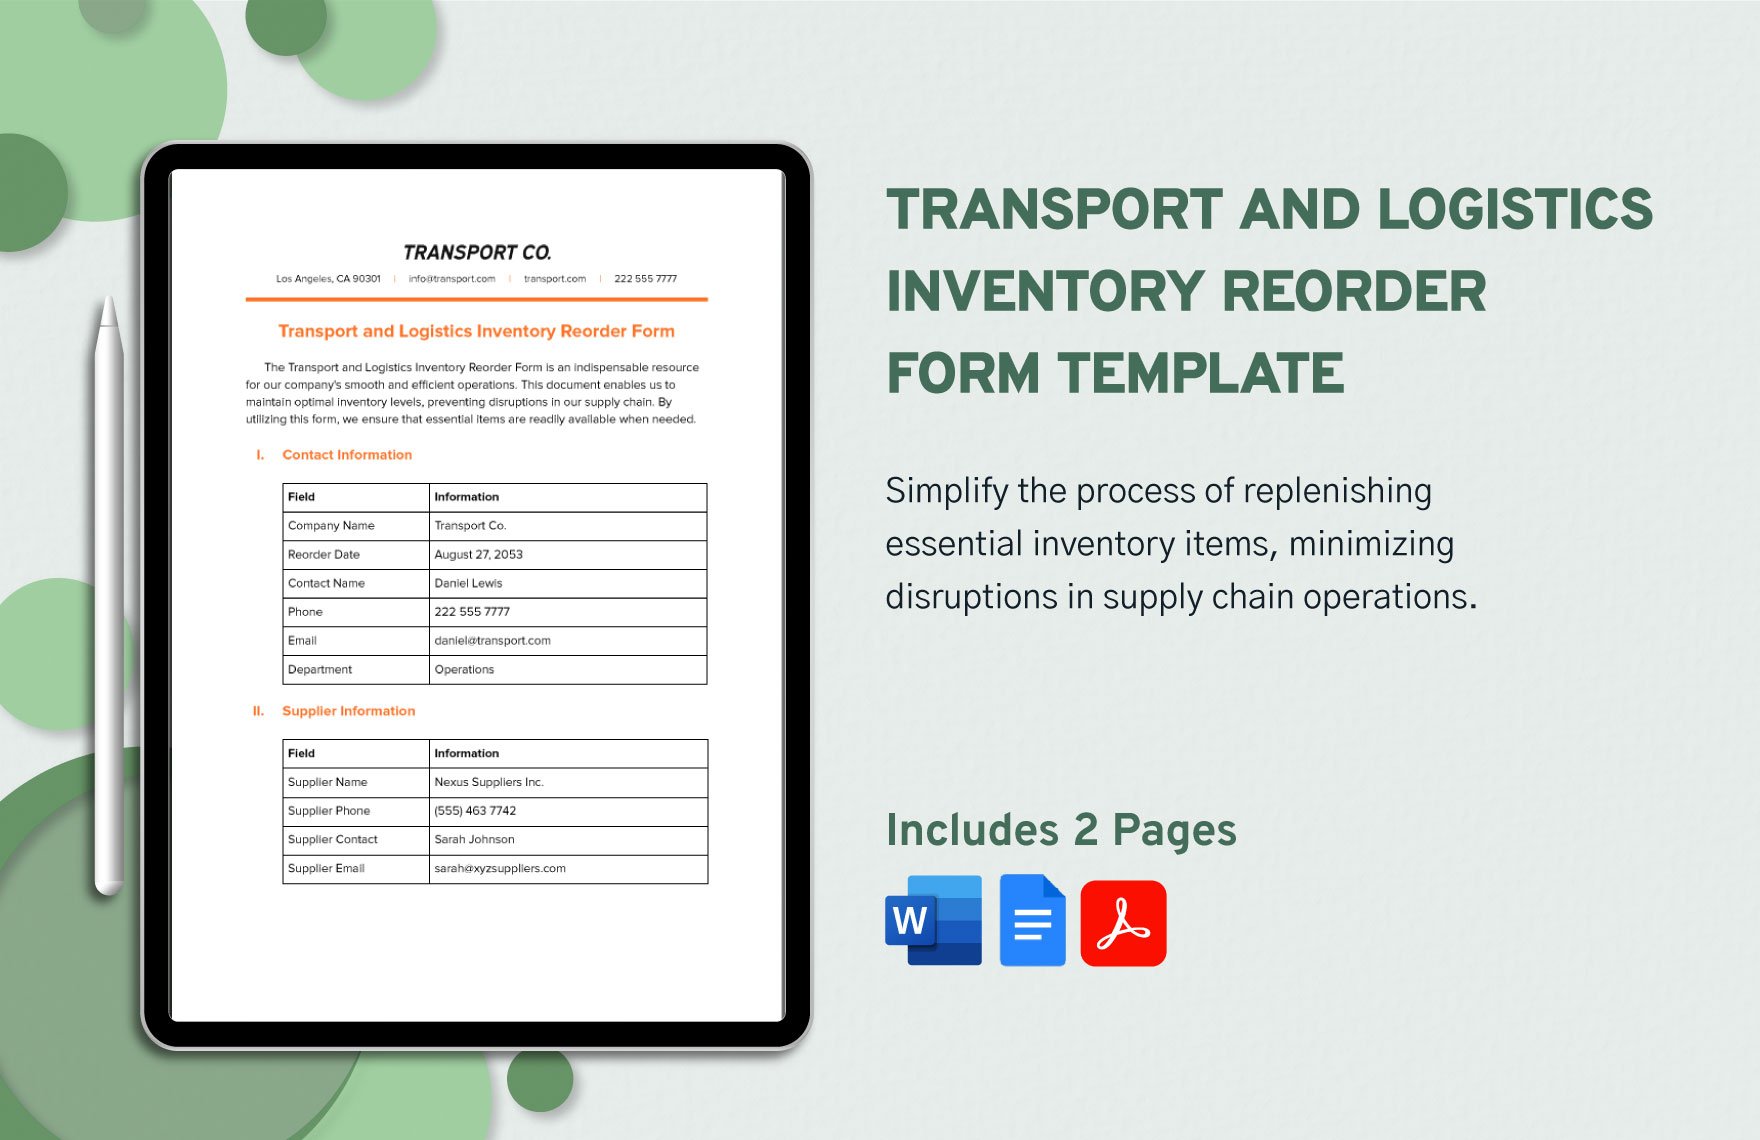 Transport and Logistics Inventory Reorder Form Template in Word, Google Docs, PDF